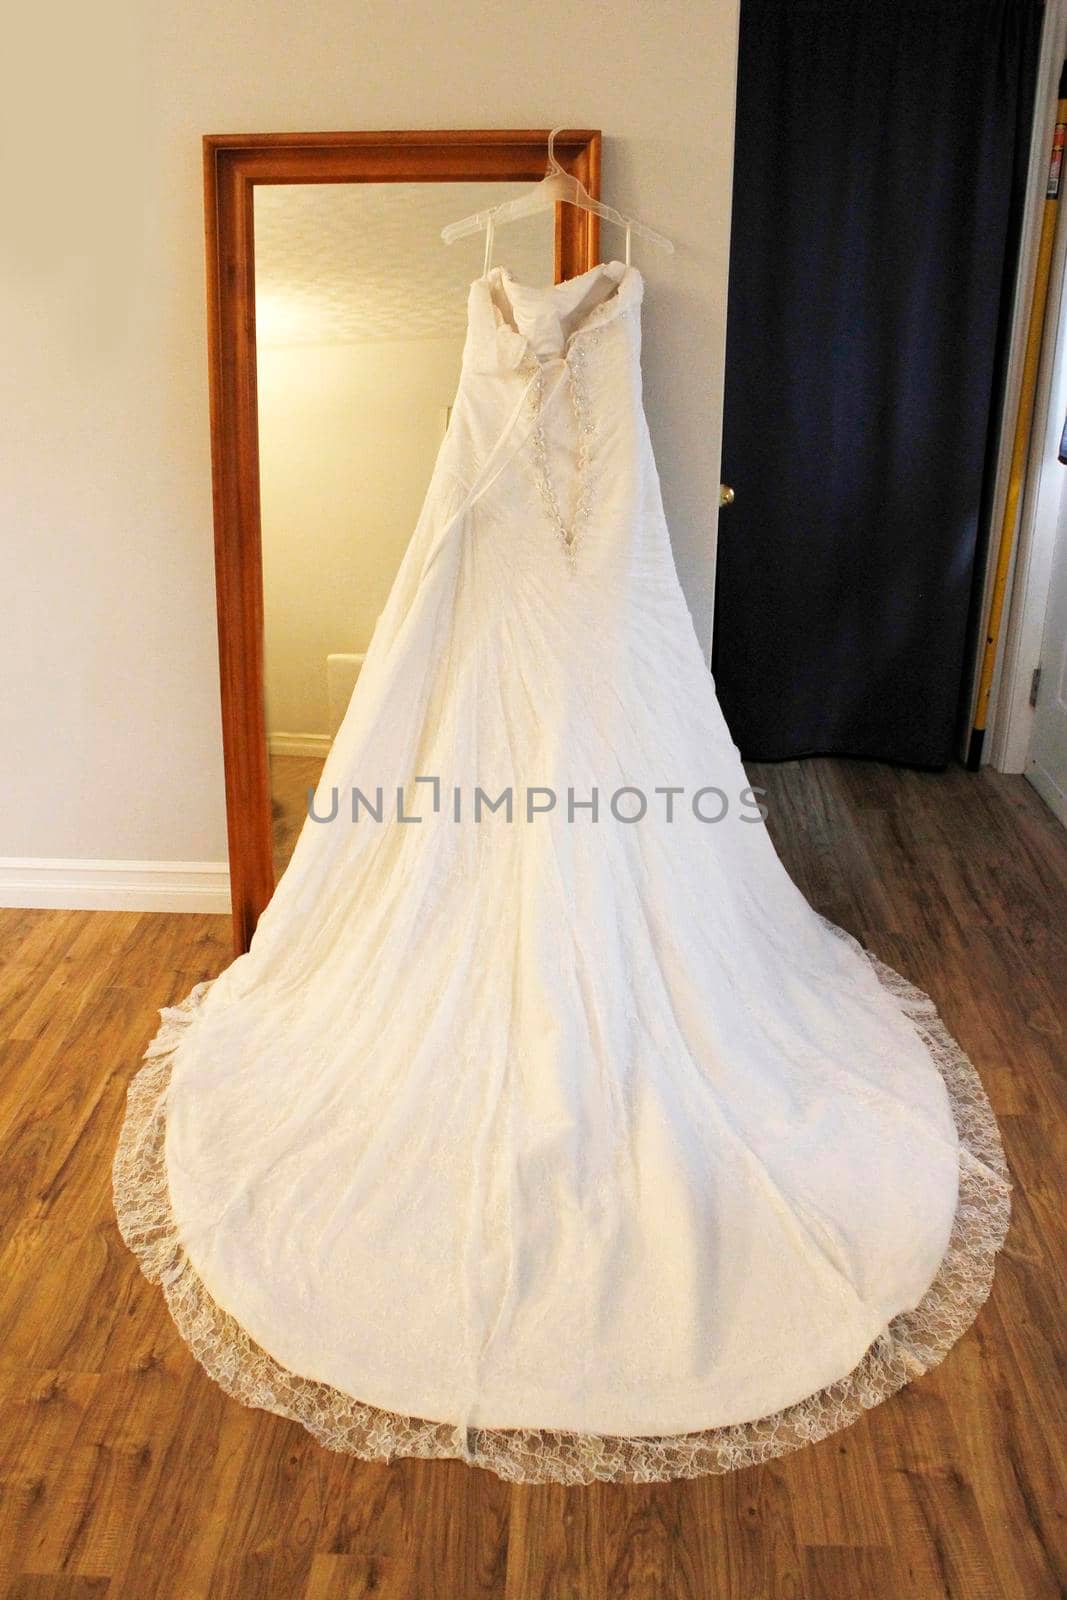 Gorgeous back view of a beautiful lace wedding dress with a round lovely train hung on a mirror